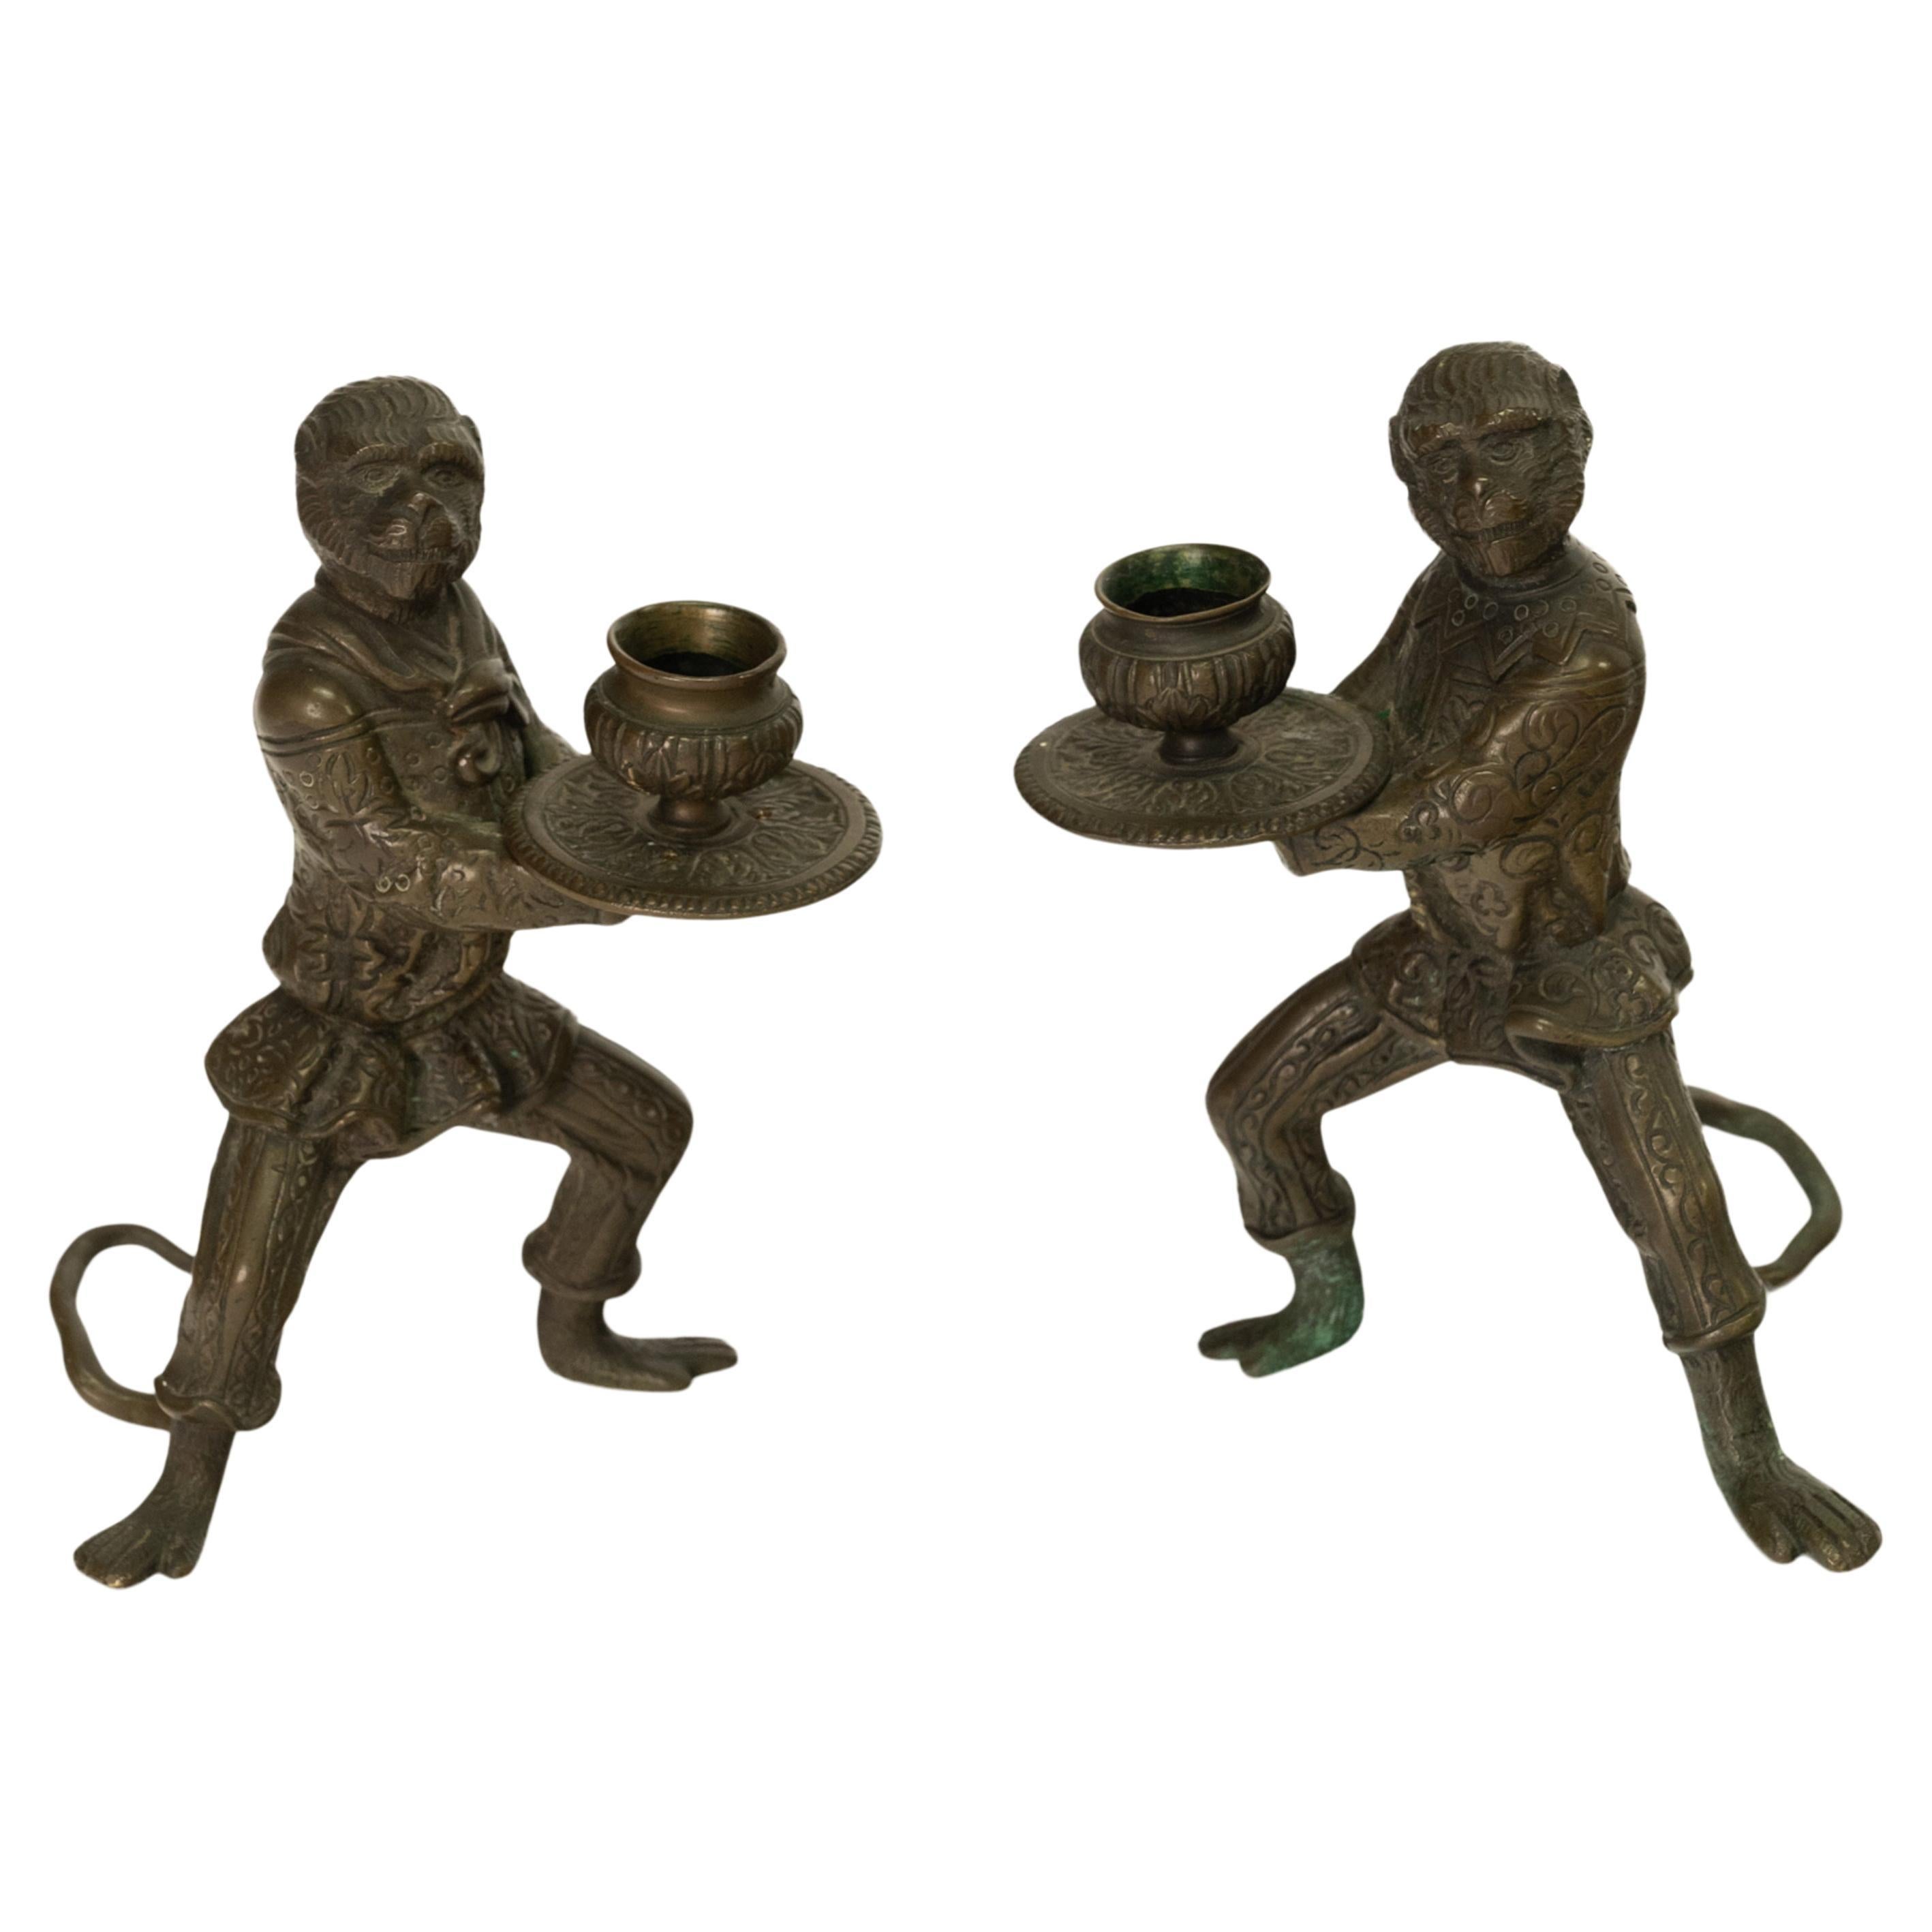 A good pair of antique French bronze monkey statuette candlesticks, circa 1900.
This pair of whimisical candlesticks are modeled as monkeys, with engraved Venetian outifts as worn by The 